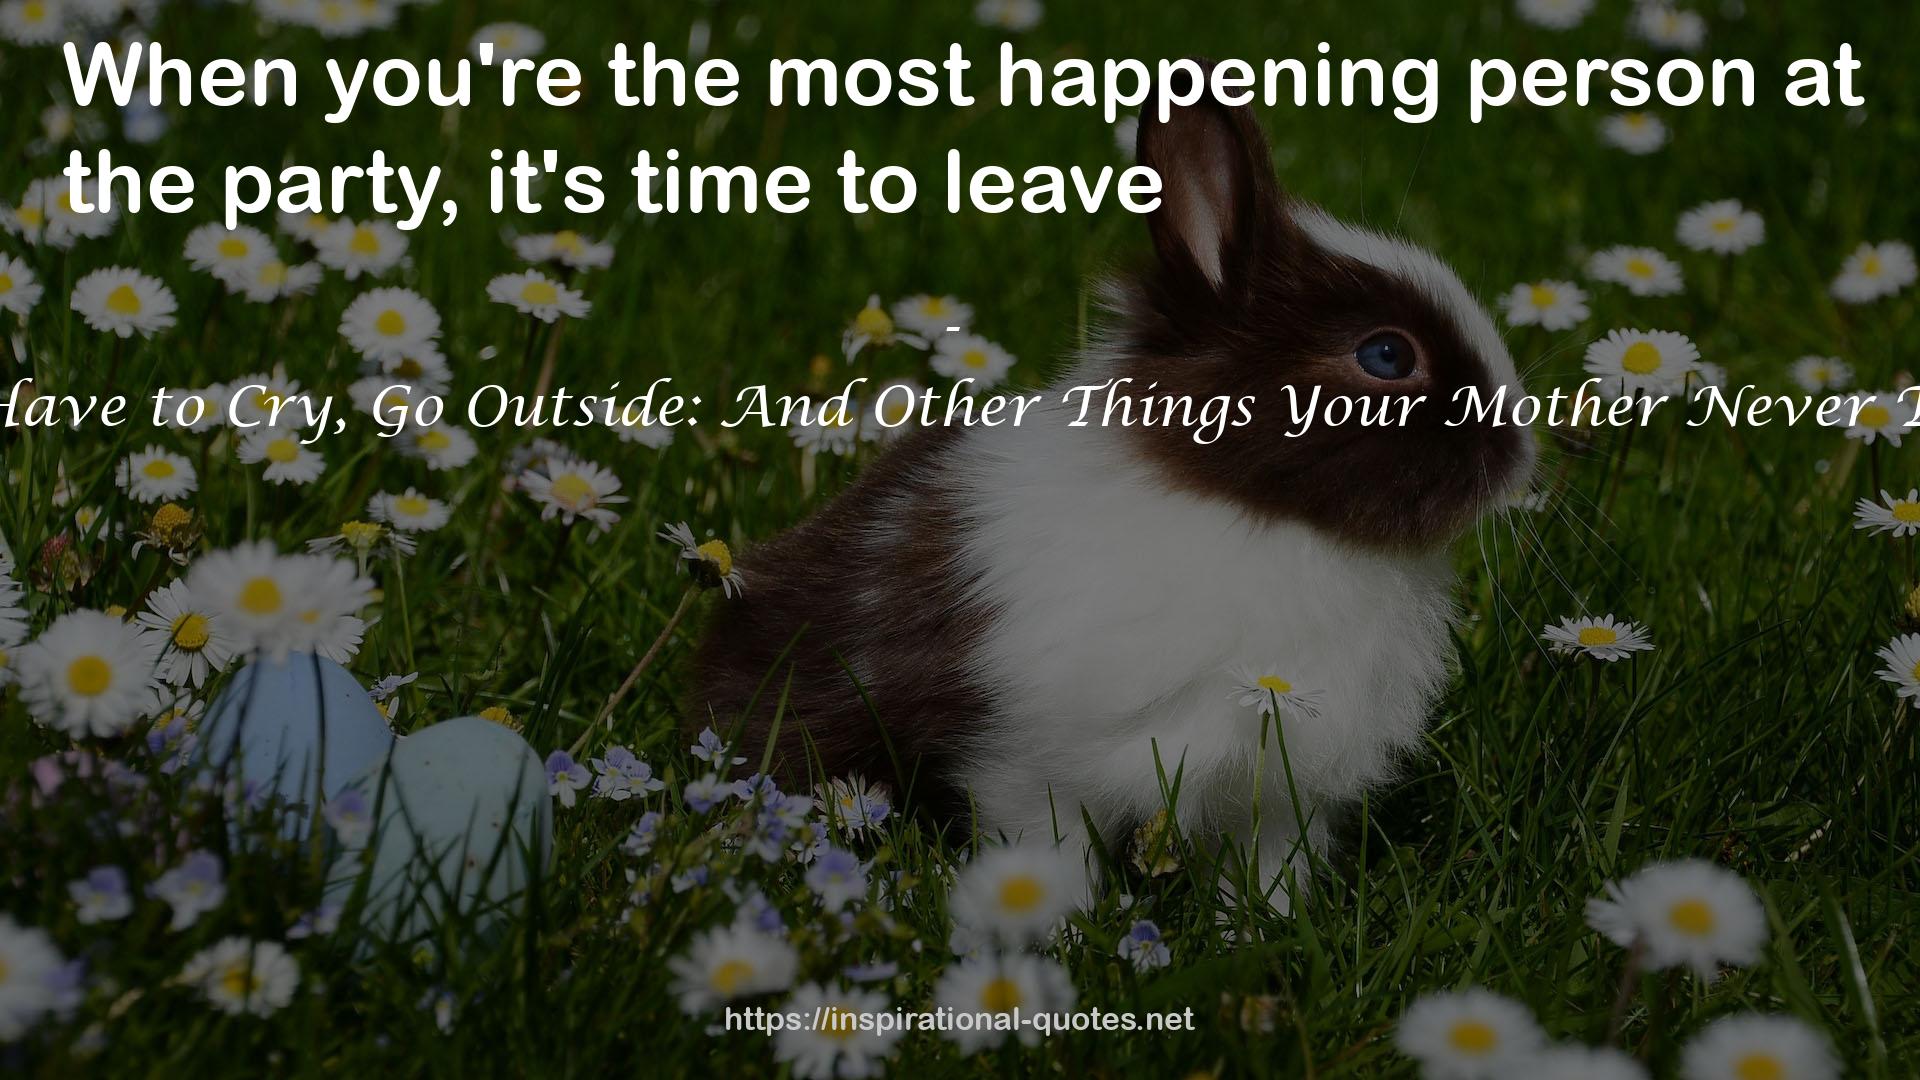 If You Have to Cry, Go Outside: And Other Things Your Mother Never Told You QUOTES